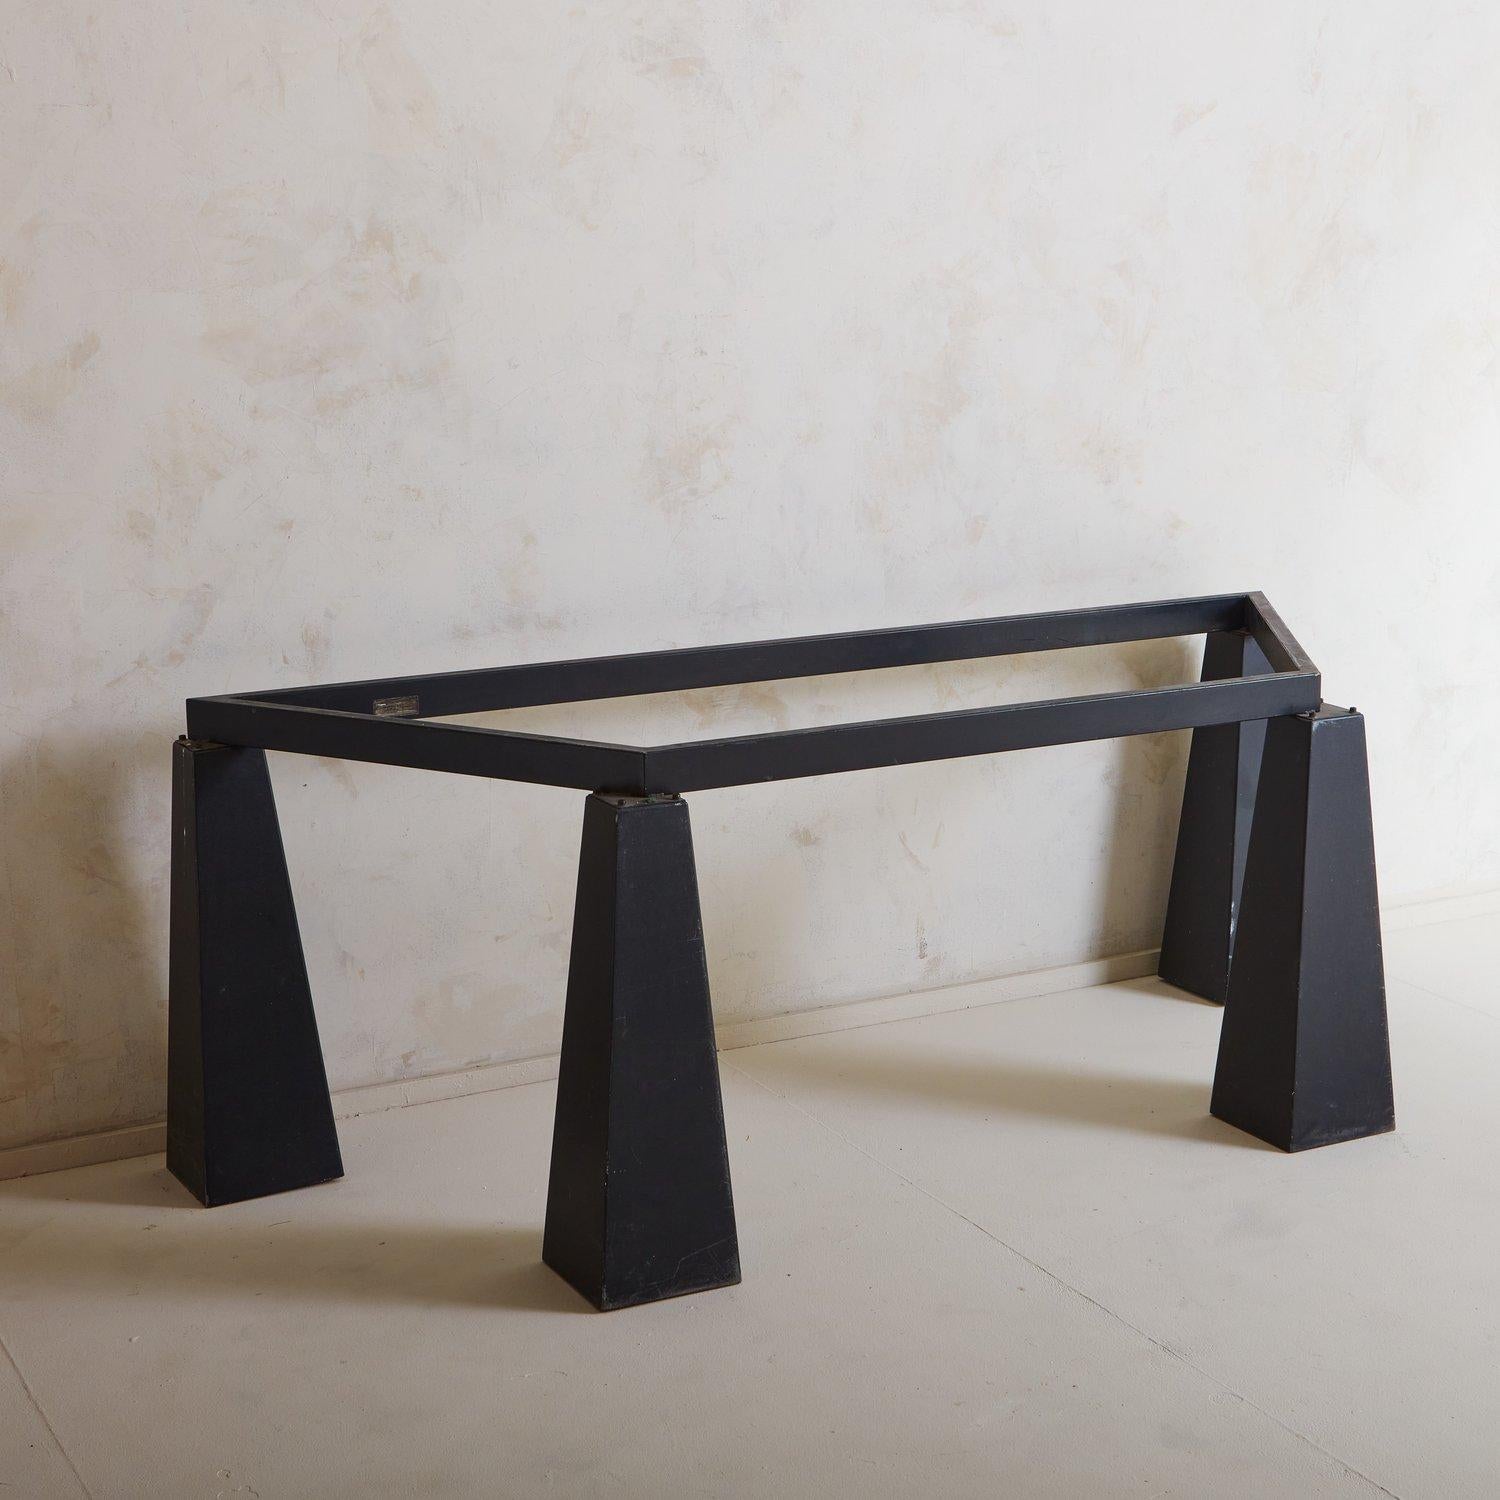 Red Marble + Iron Base Demilune Console Table, Belgium 1980s For Sale 5